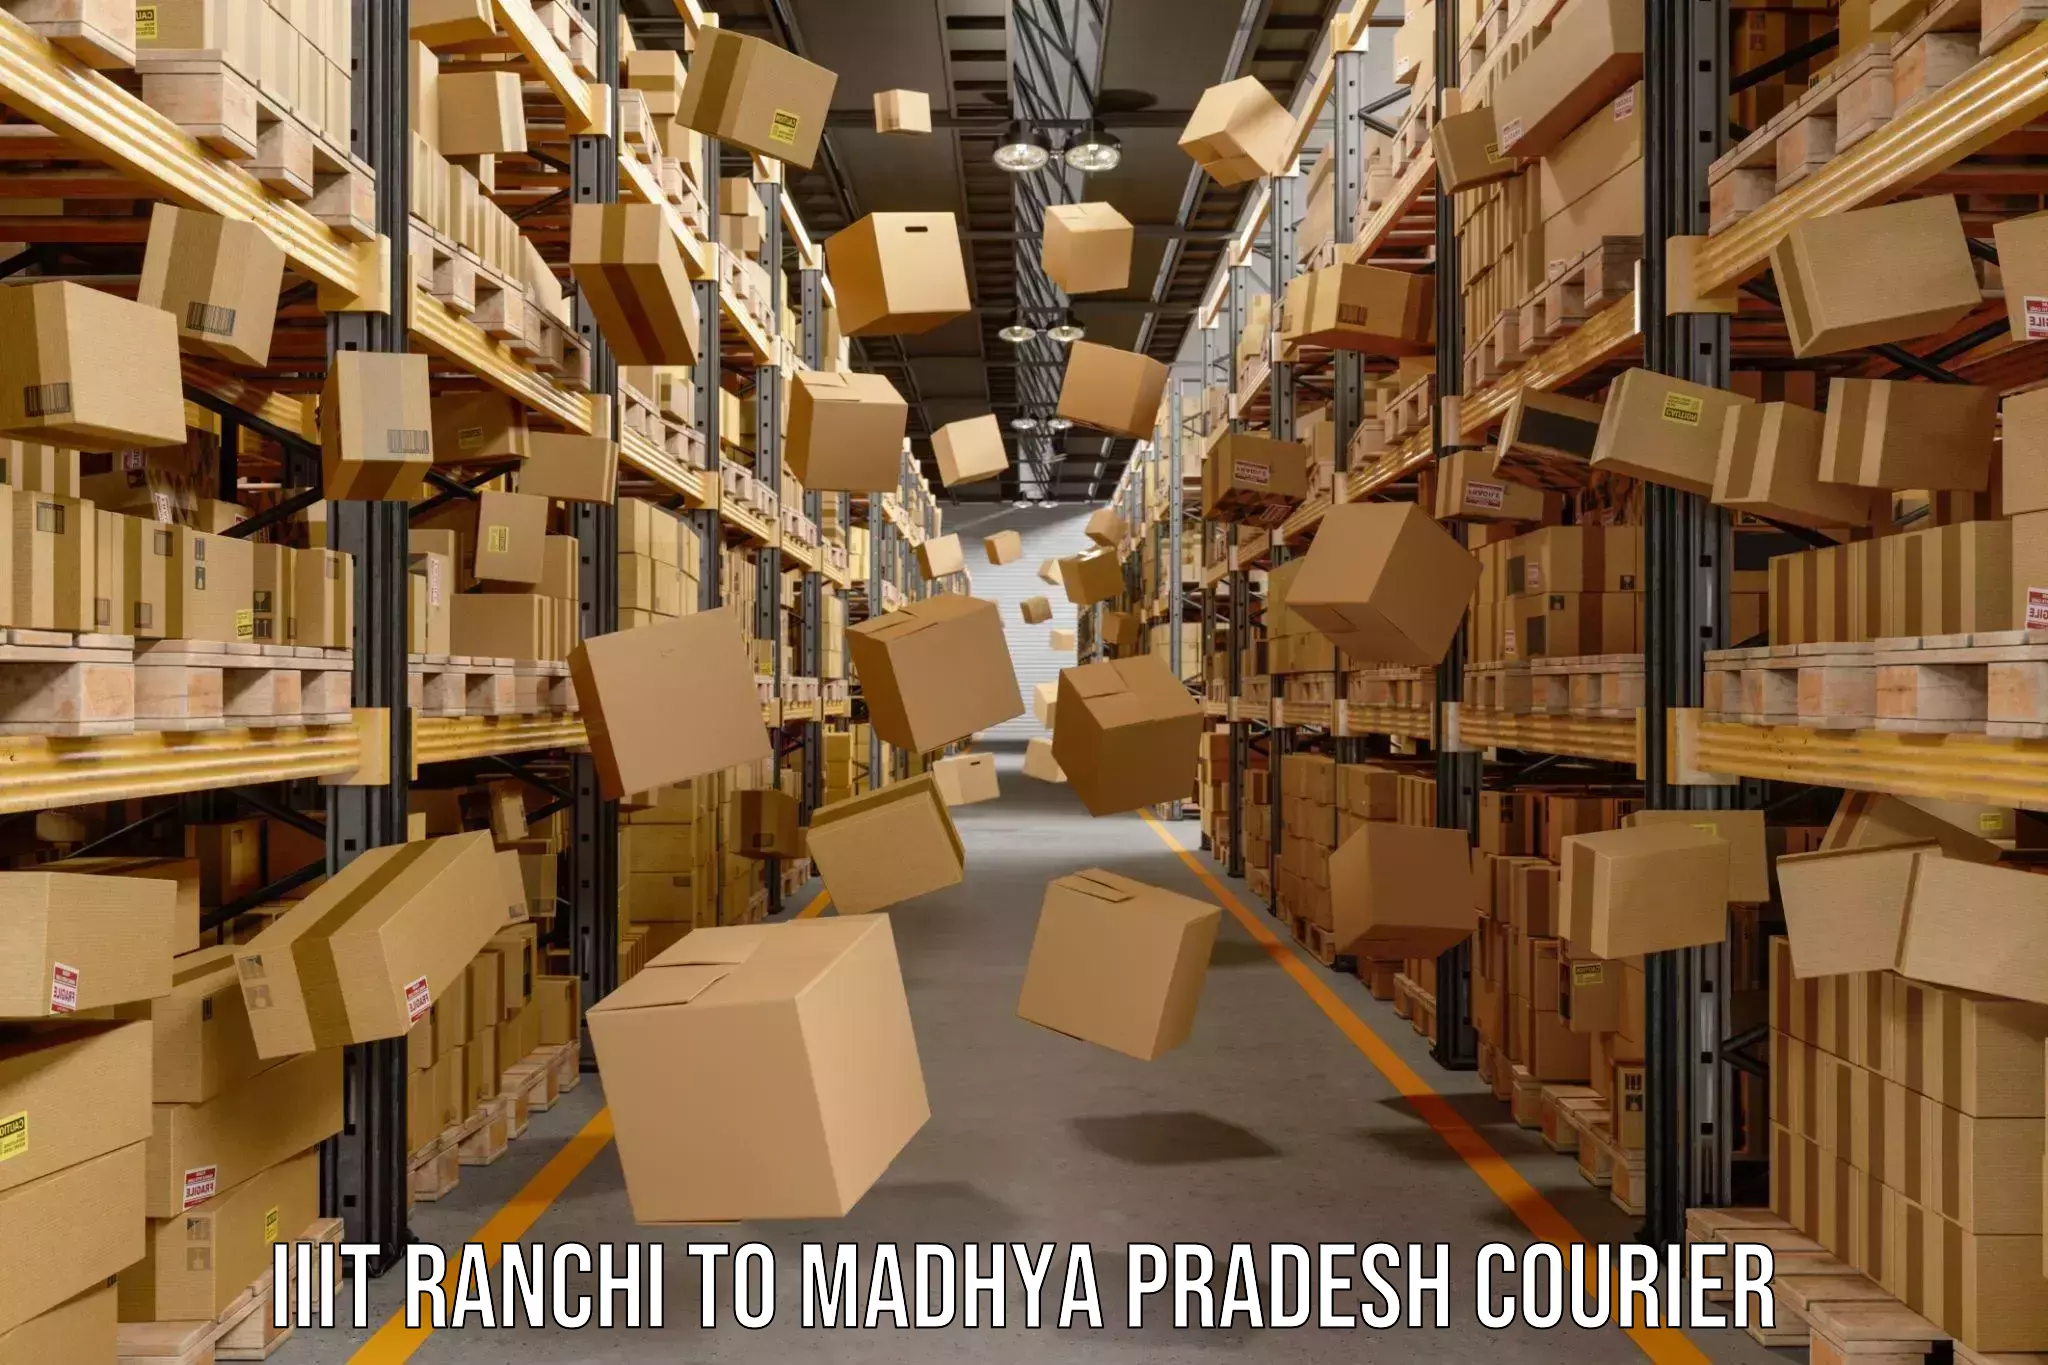 Courier app IIIT Ranchi to Nagod